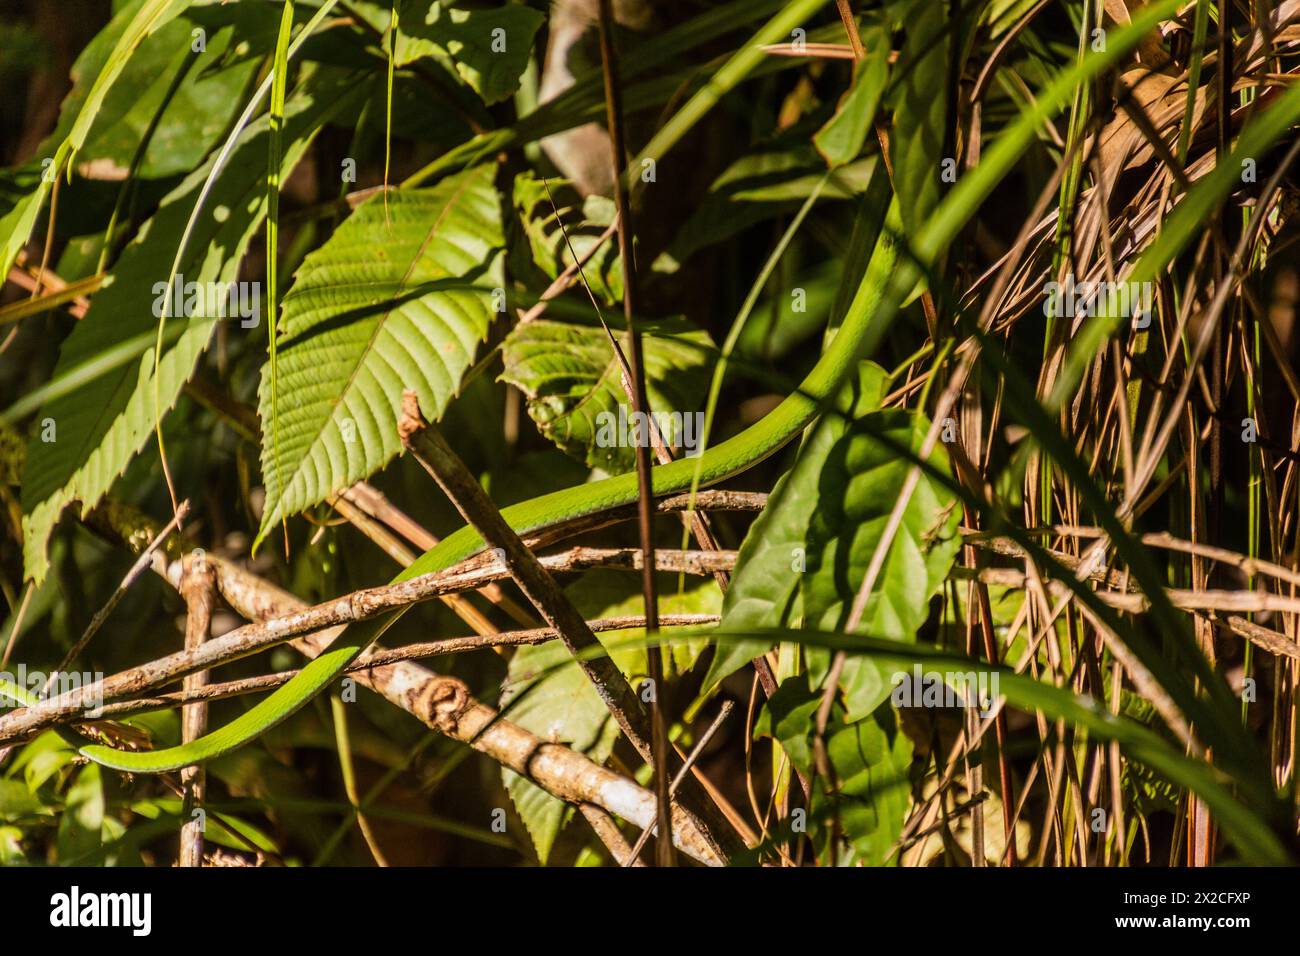 Asian whip snake (Ahaetulla) in a forest near Luang Namtha, Laos Stock Photo